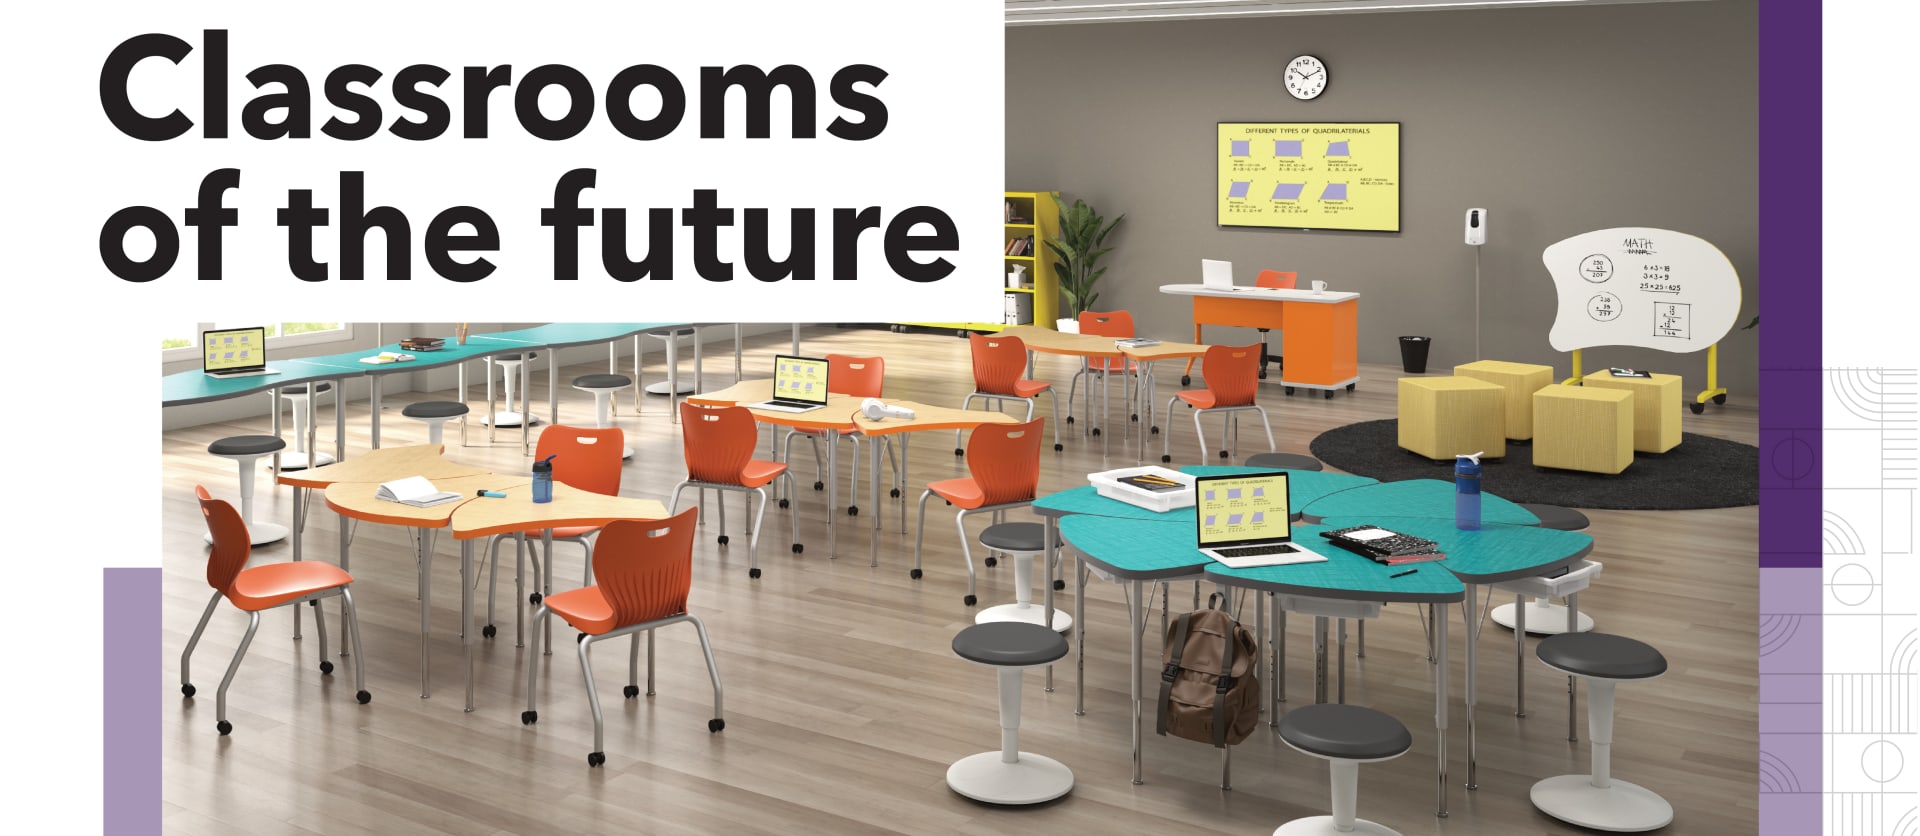 HOW SCHOOLS ARE FORMING CLASSROOMS FOR THE FUTURE